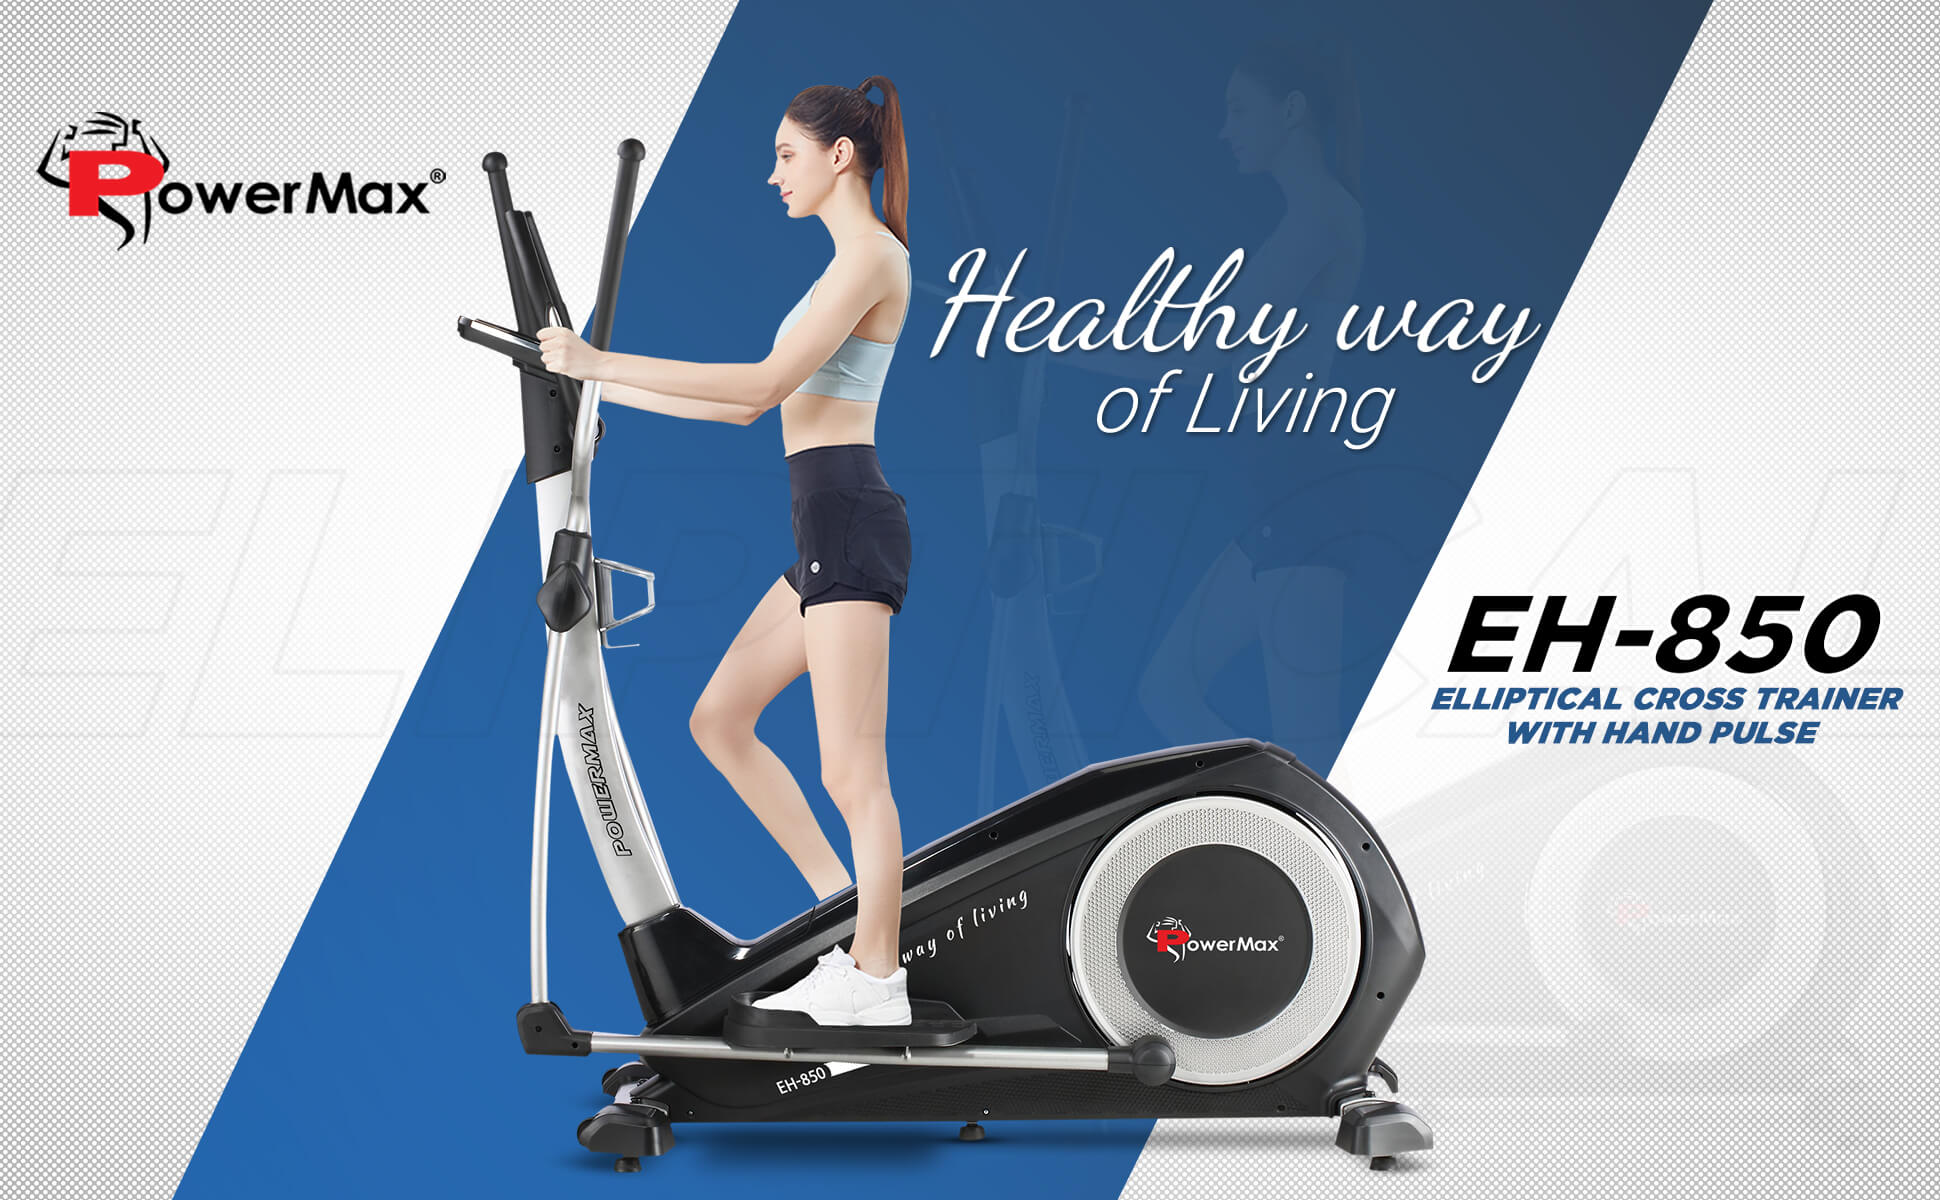 buy powermax eh-850 elliptical cross trainer with hand pulse, water bottle cage for home use